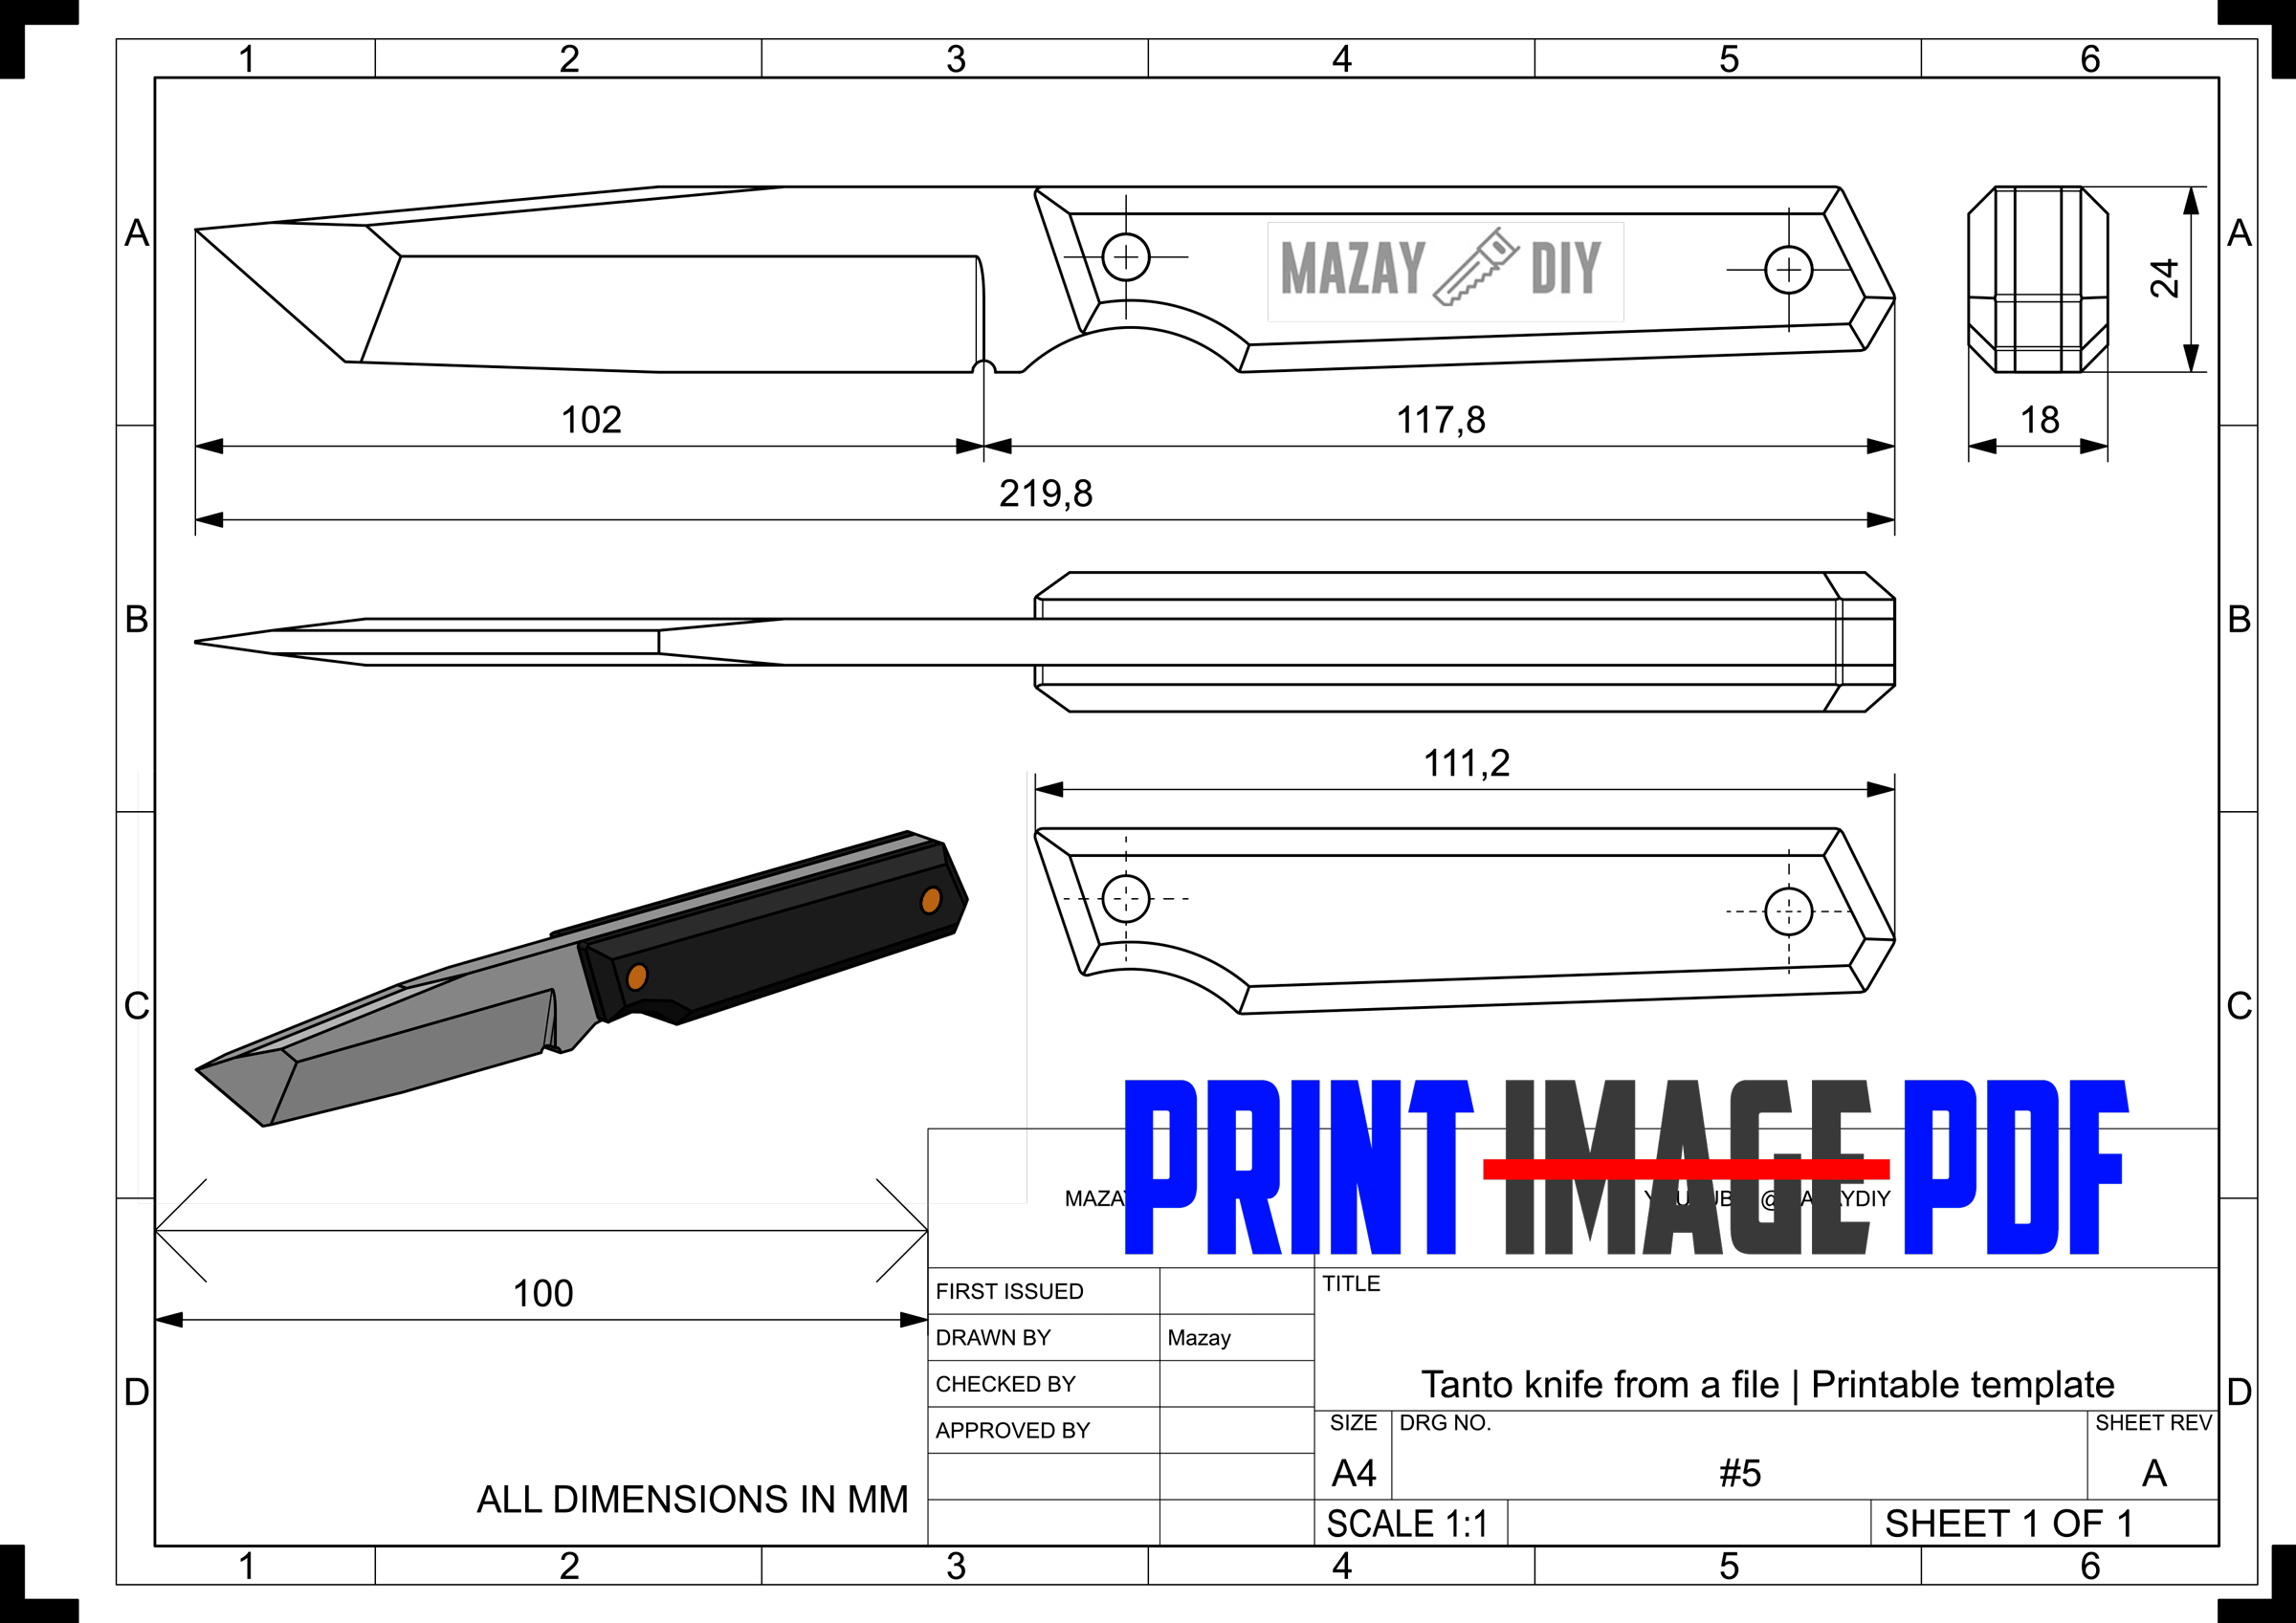 https://www.homemadetools.net/forum/attachments/making-japanese-tanto-knife-old-file-%5Bwithout-power-tools%5D-tanto-knife-printable-template.png-45216d1679946472